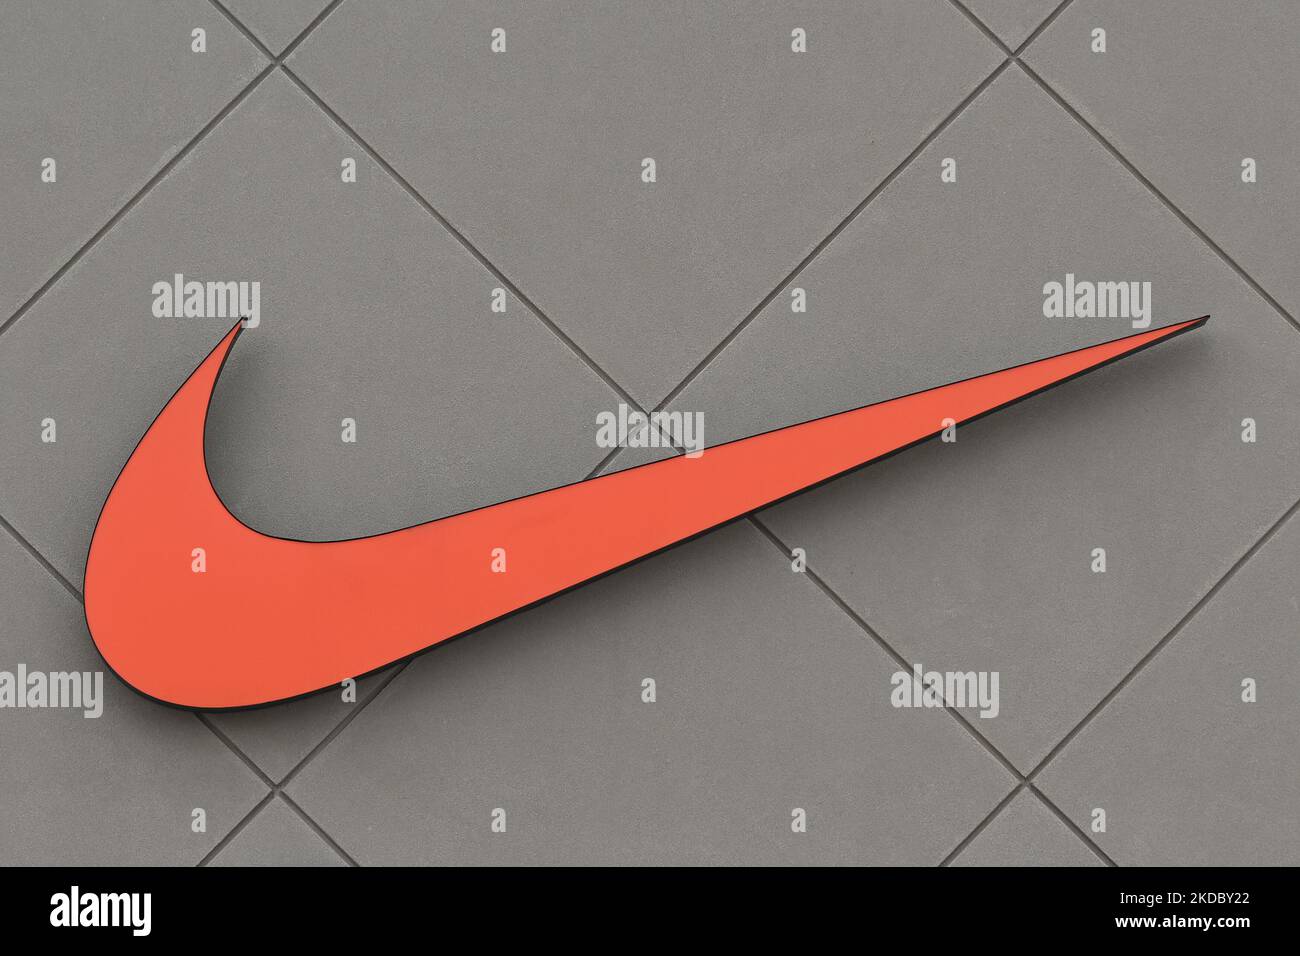 Nike label logo hi-res stock photography and images - Alamy